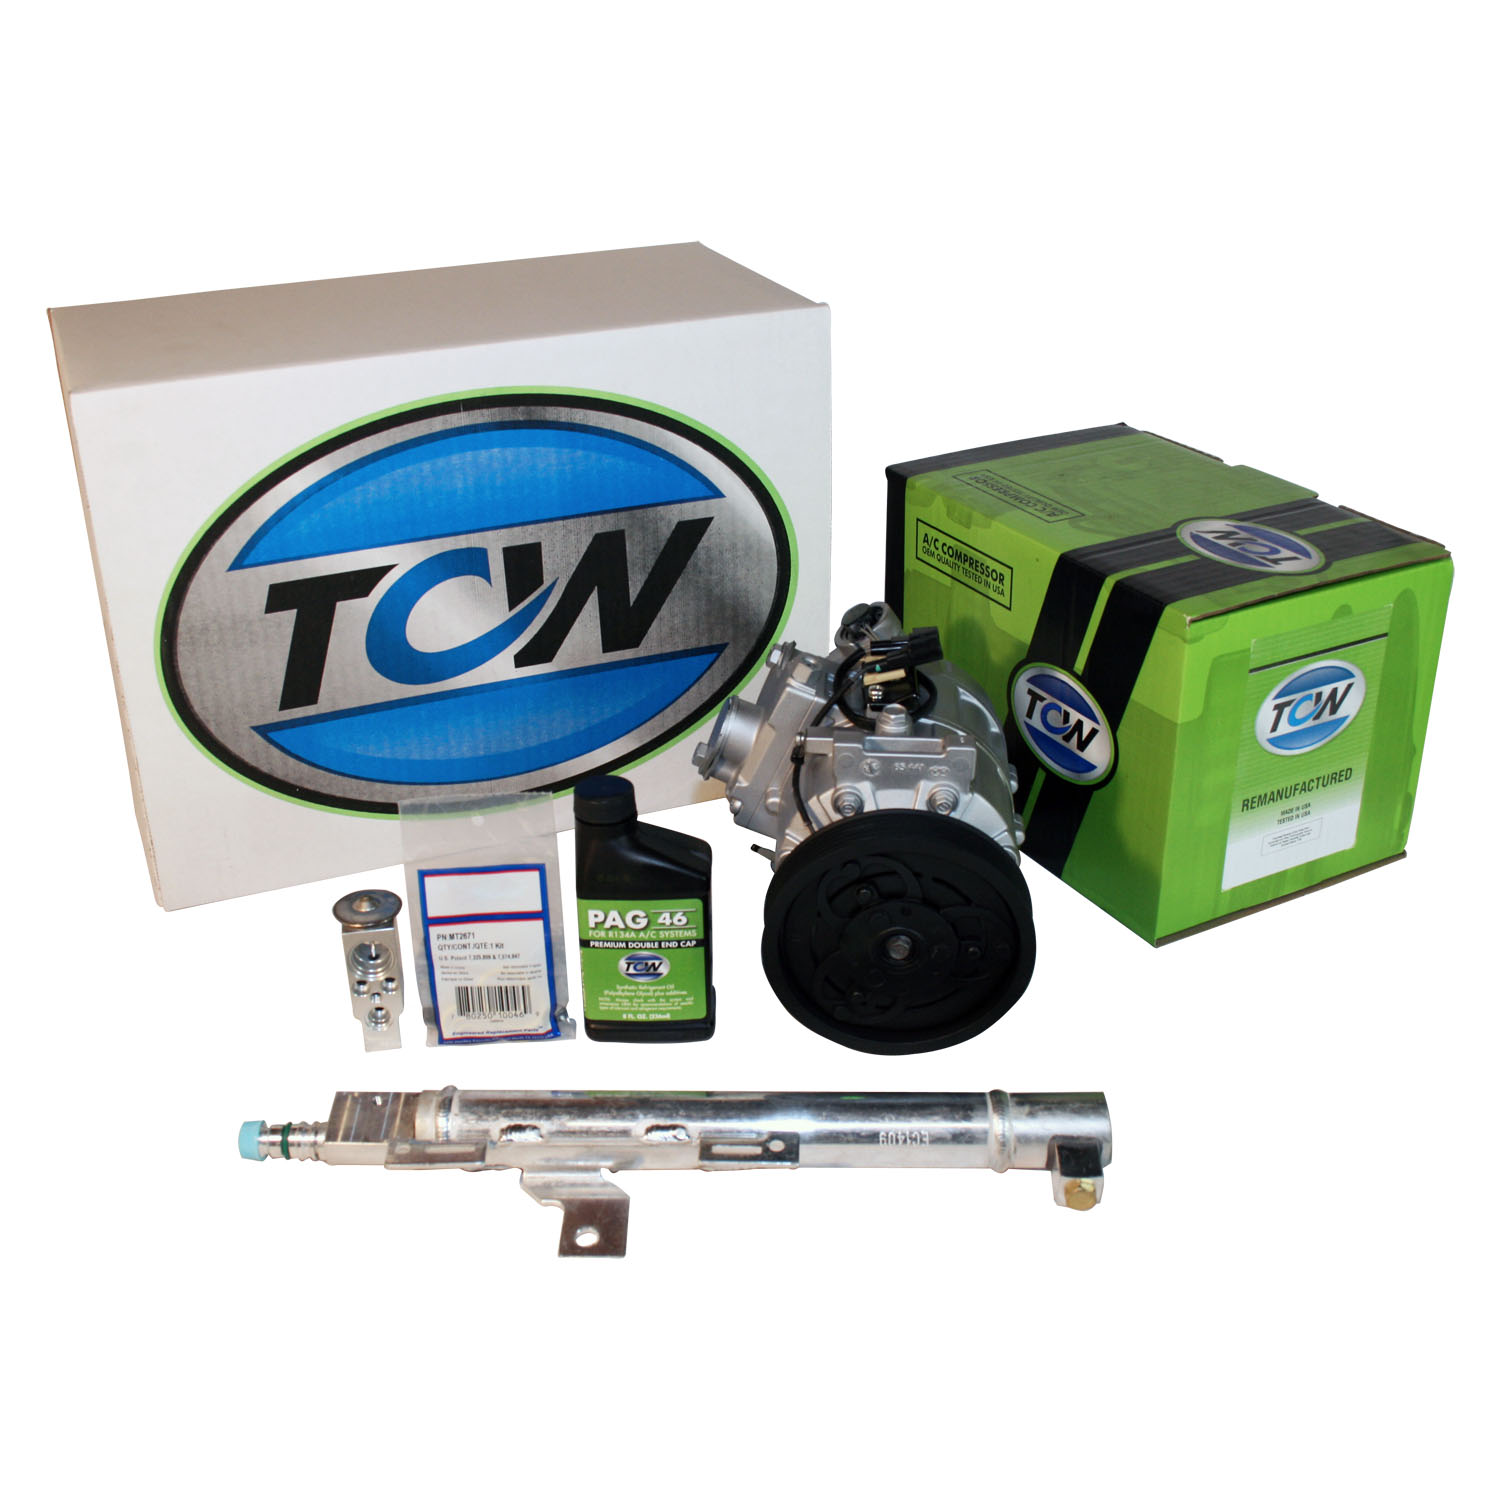 TCW Vehicle A/C Kit K1000479R Remanufactured Product Image field_60b6a13a6e67c